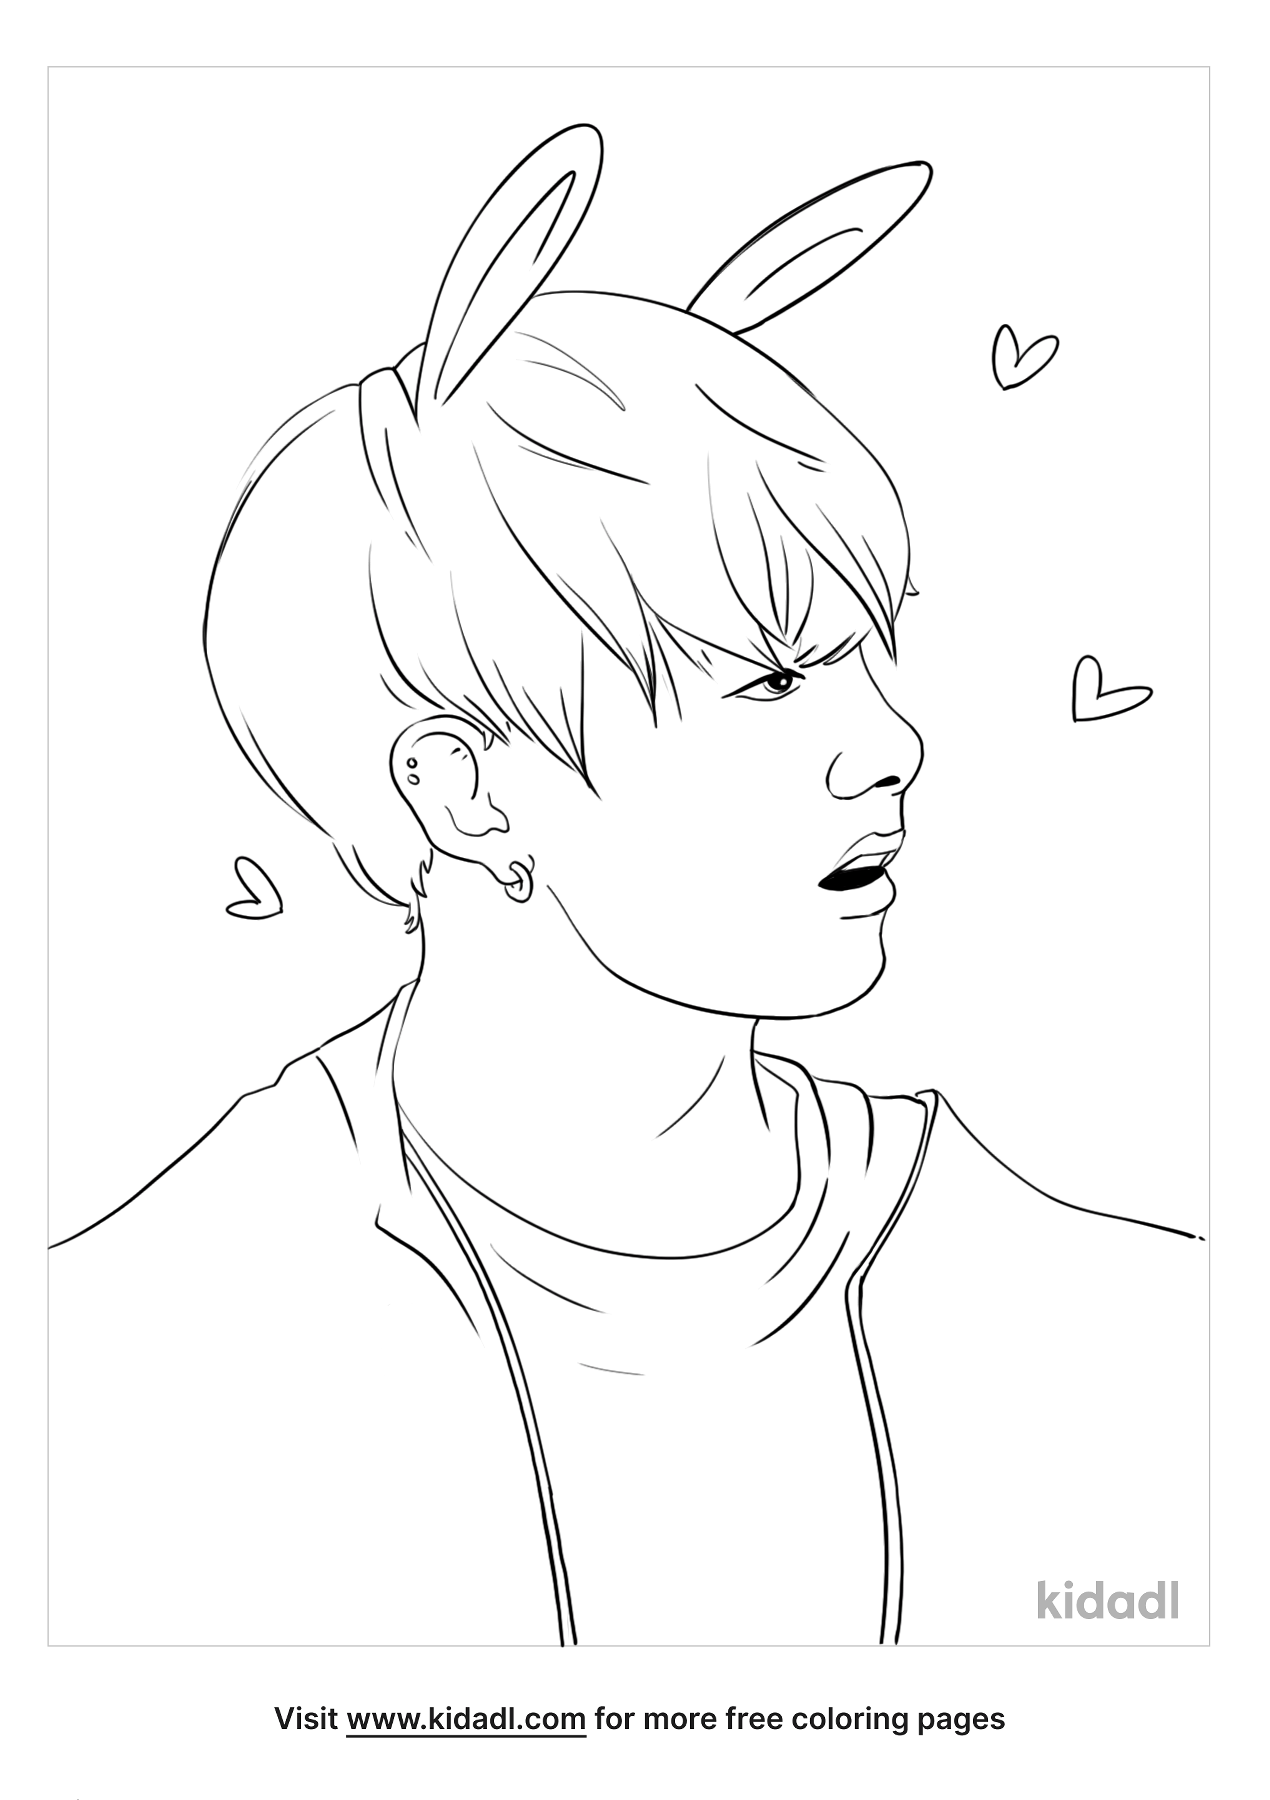 BTS Coloring Pages | Free People Coloring Pages | Kidadl